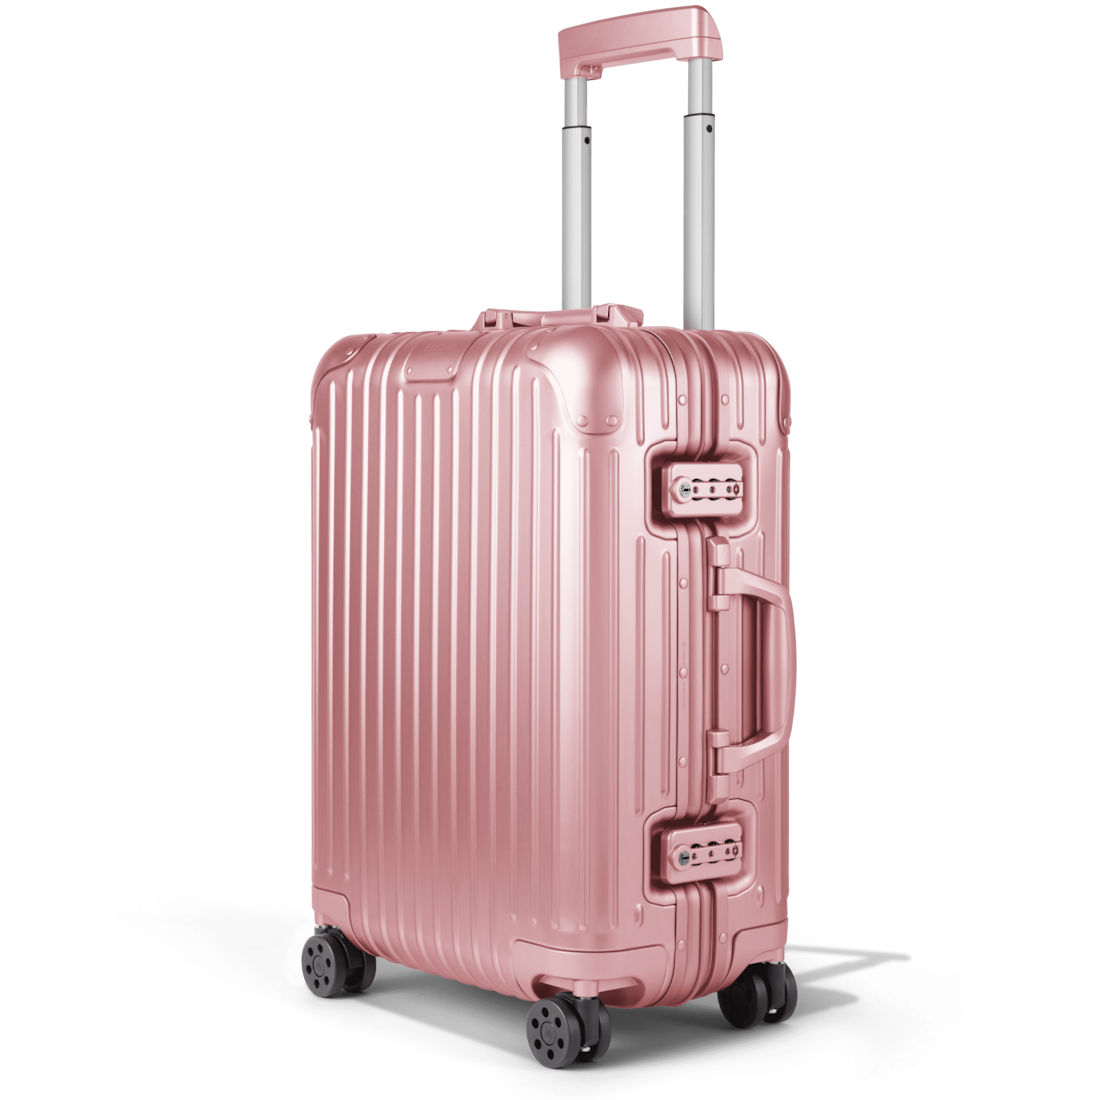 10 Best Luggage Brands with Lifetime Warranty in 2023